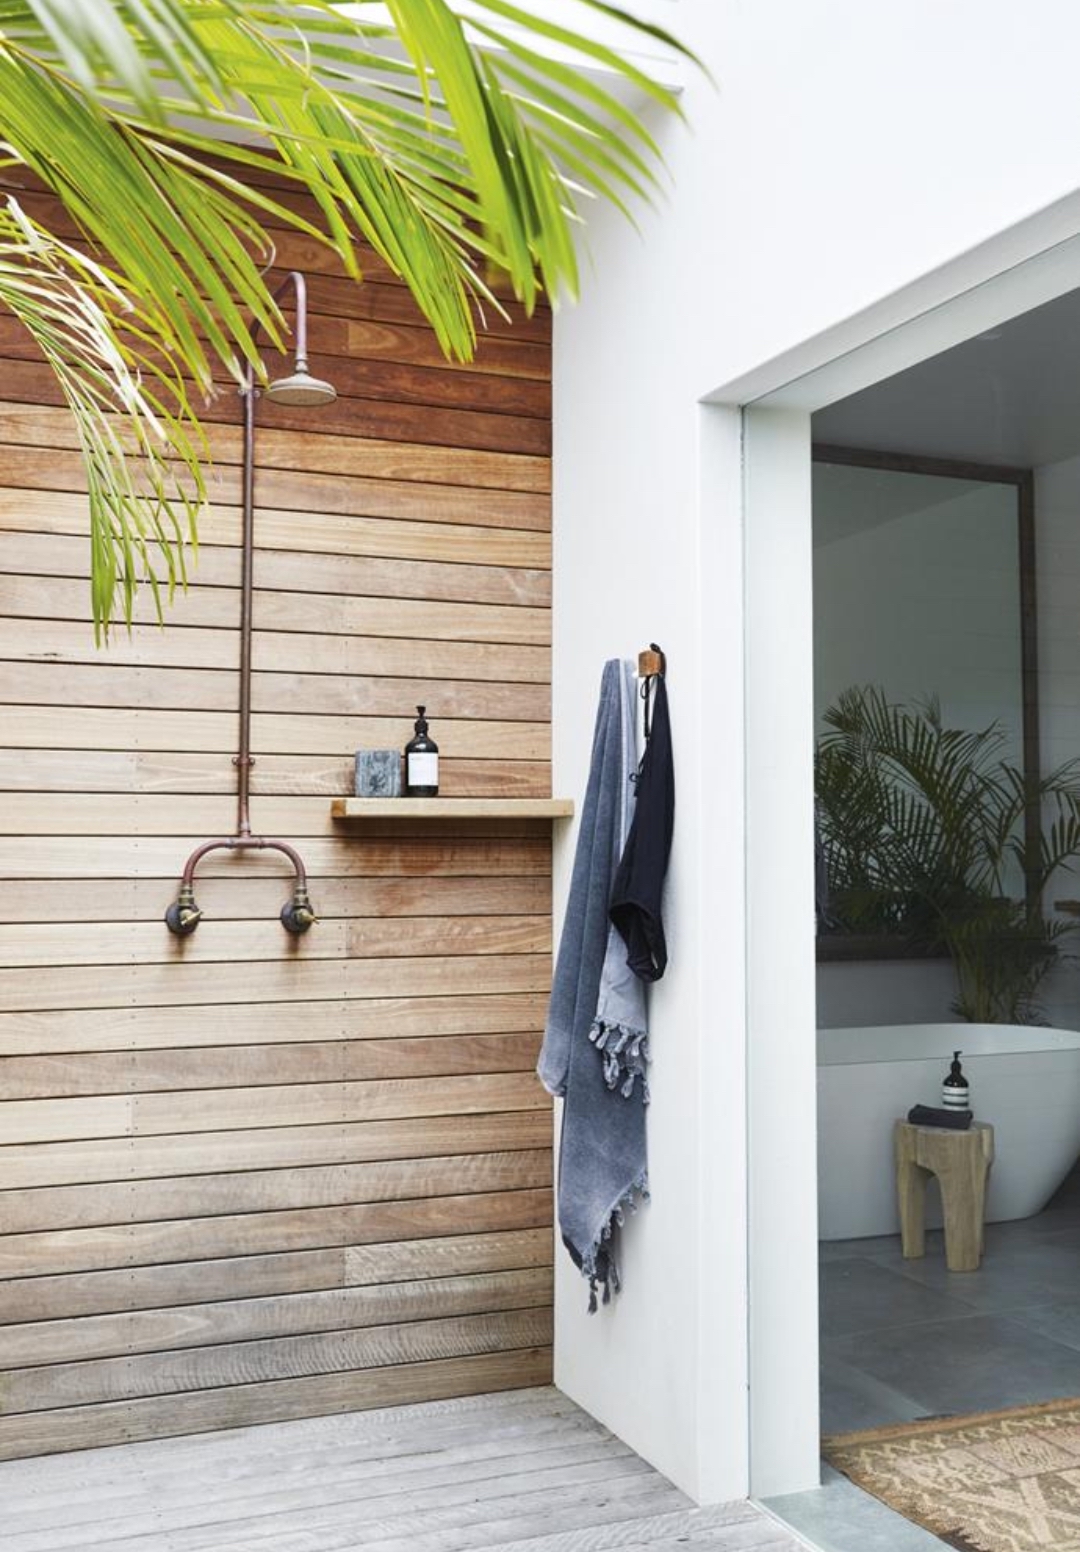 Timber walled outdoor shower